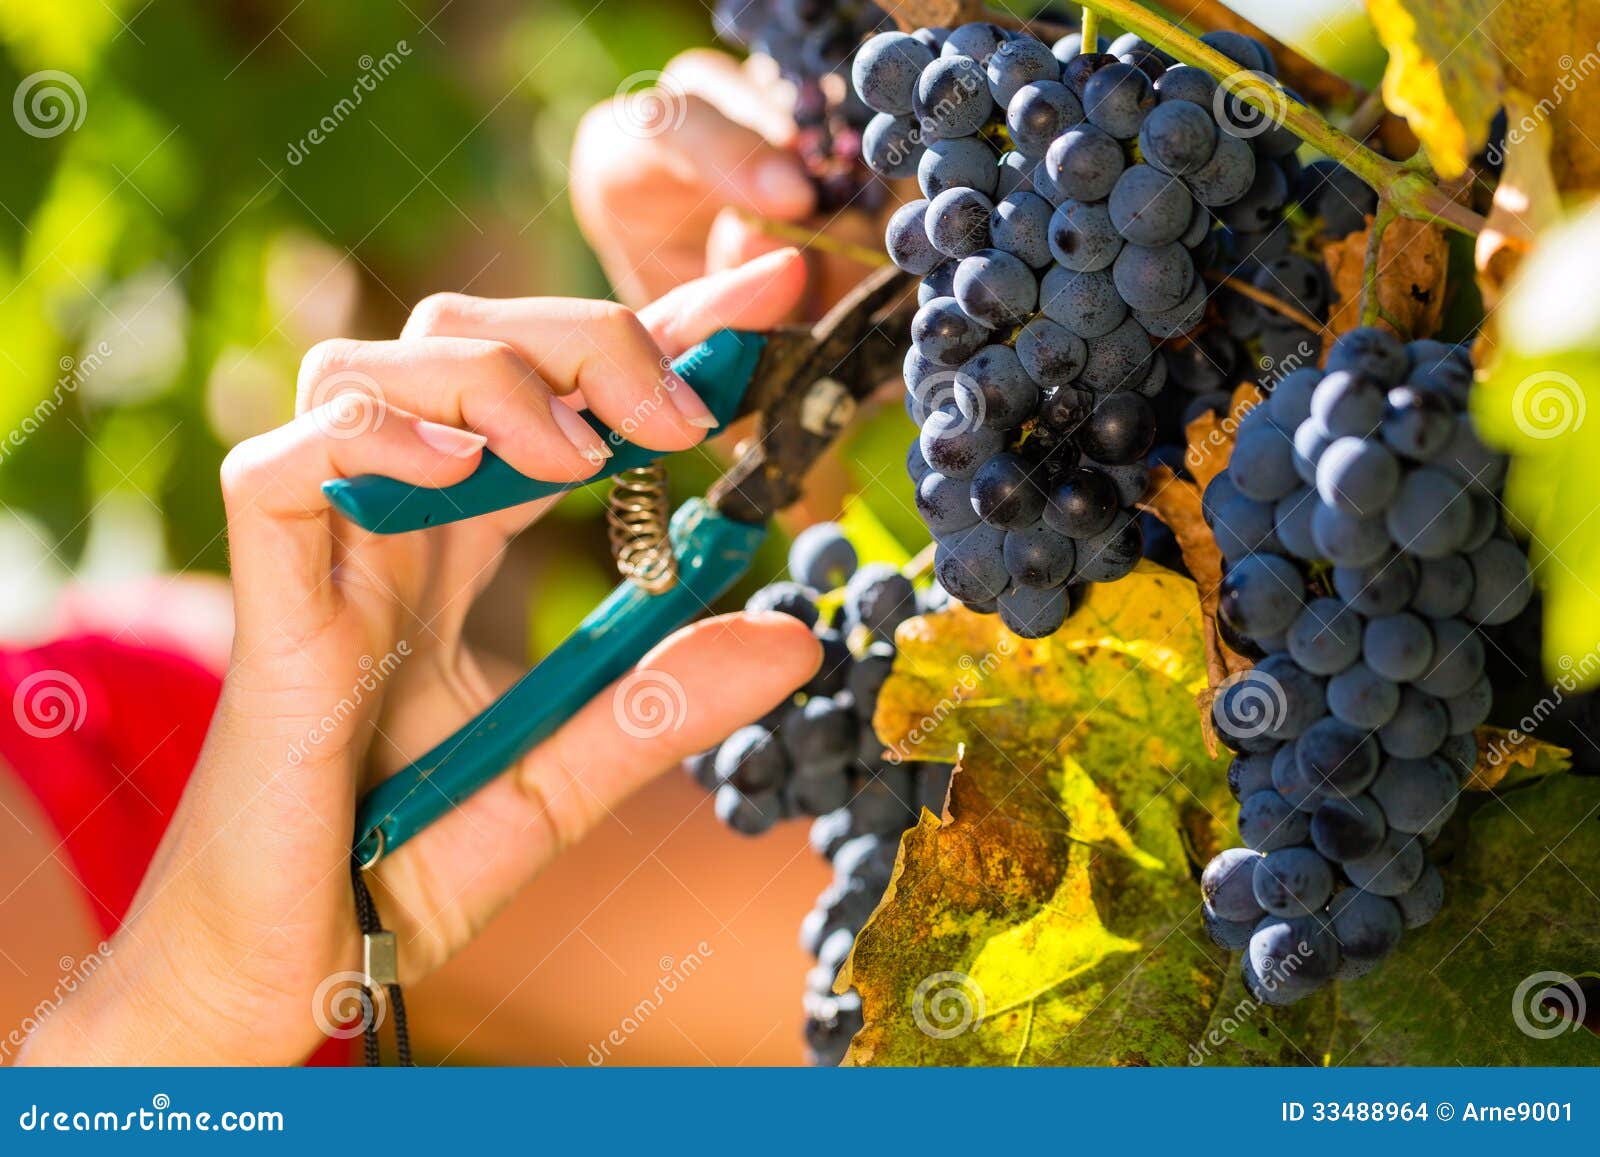 woman picking grapes with shear